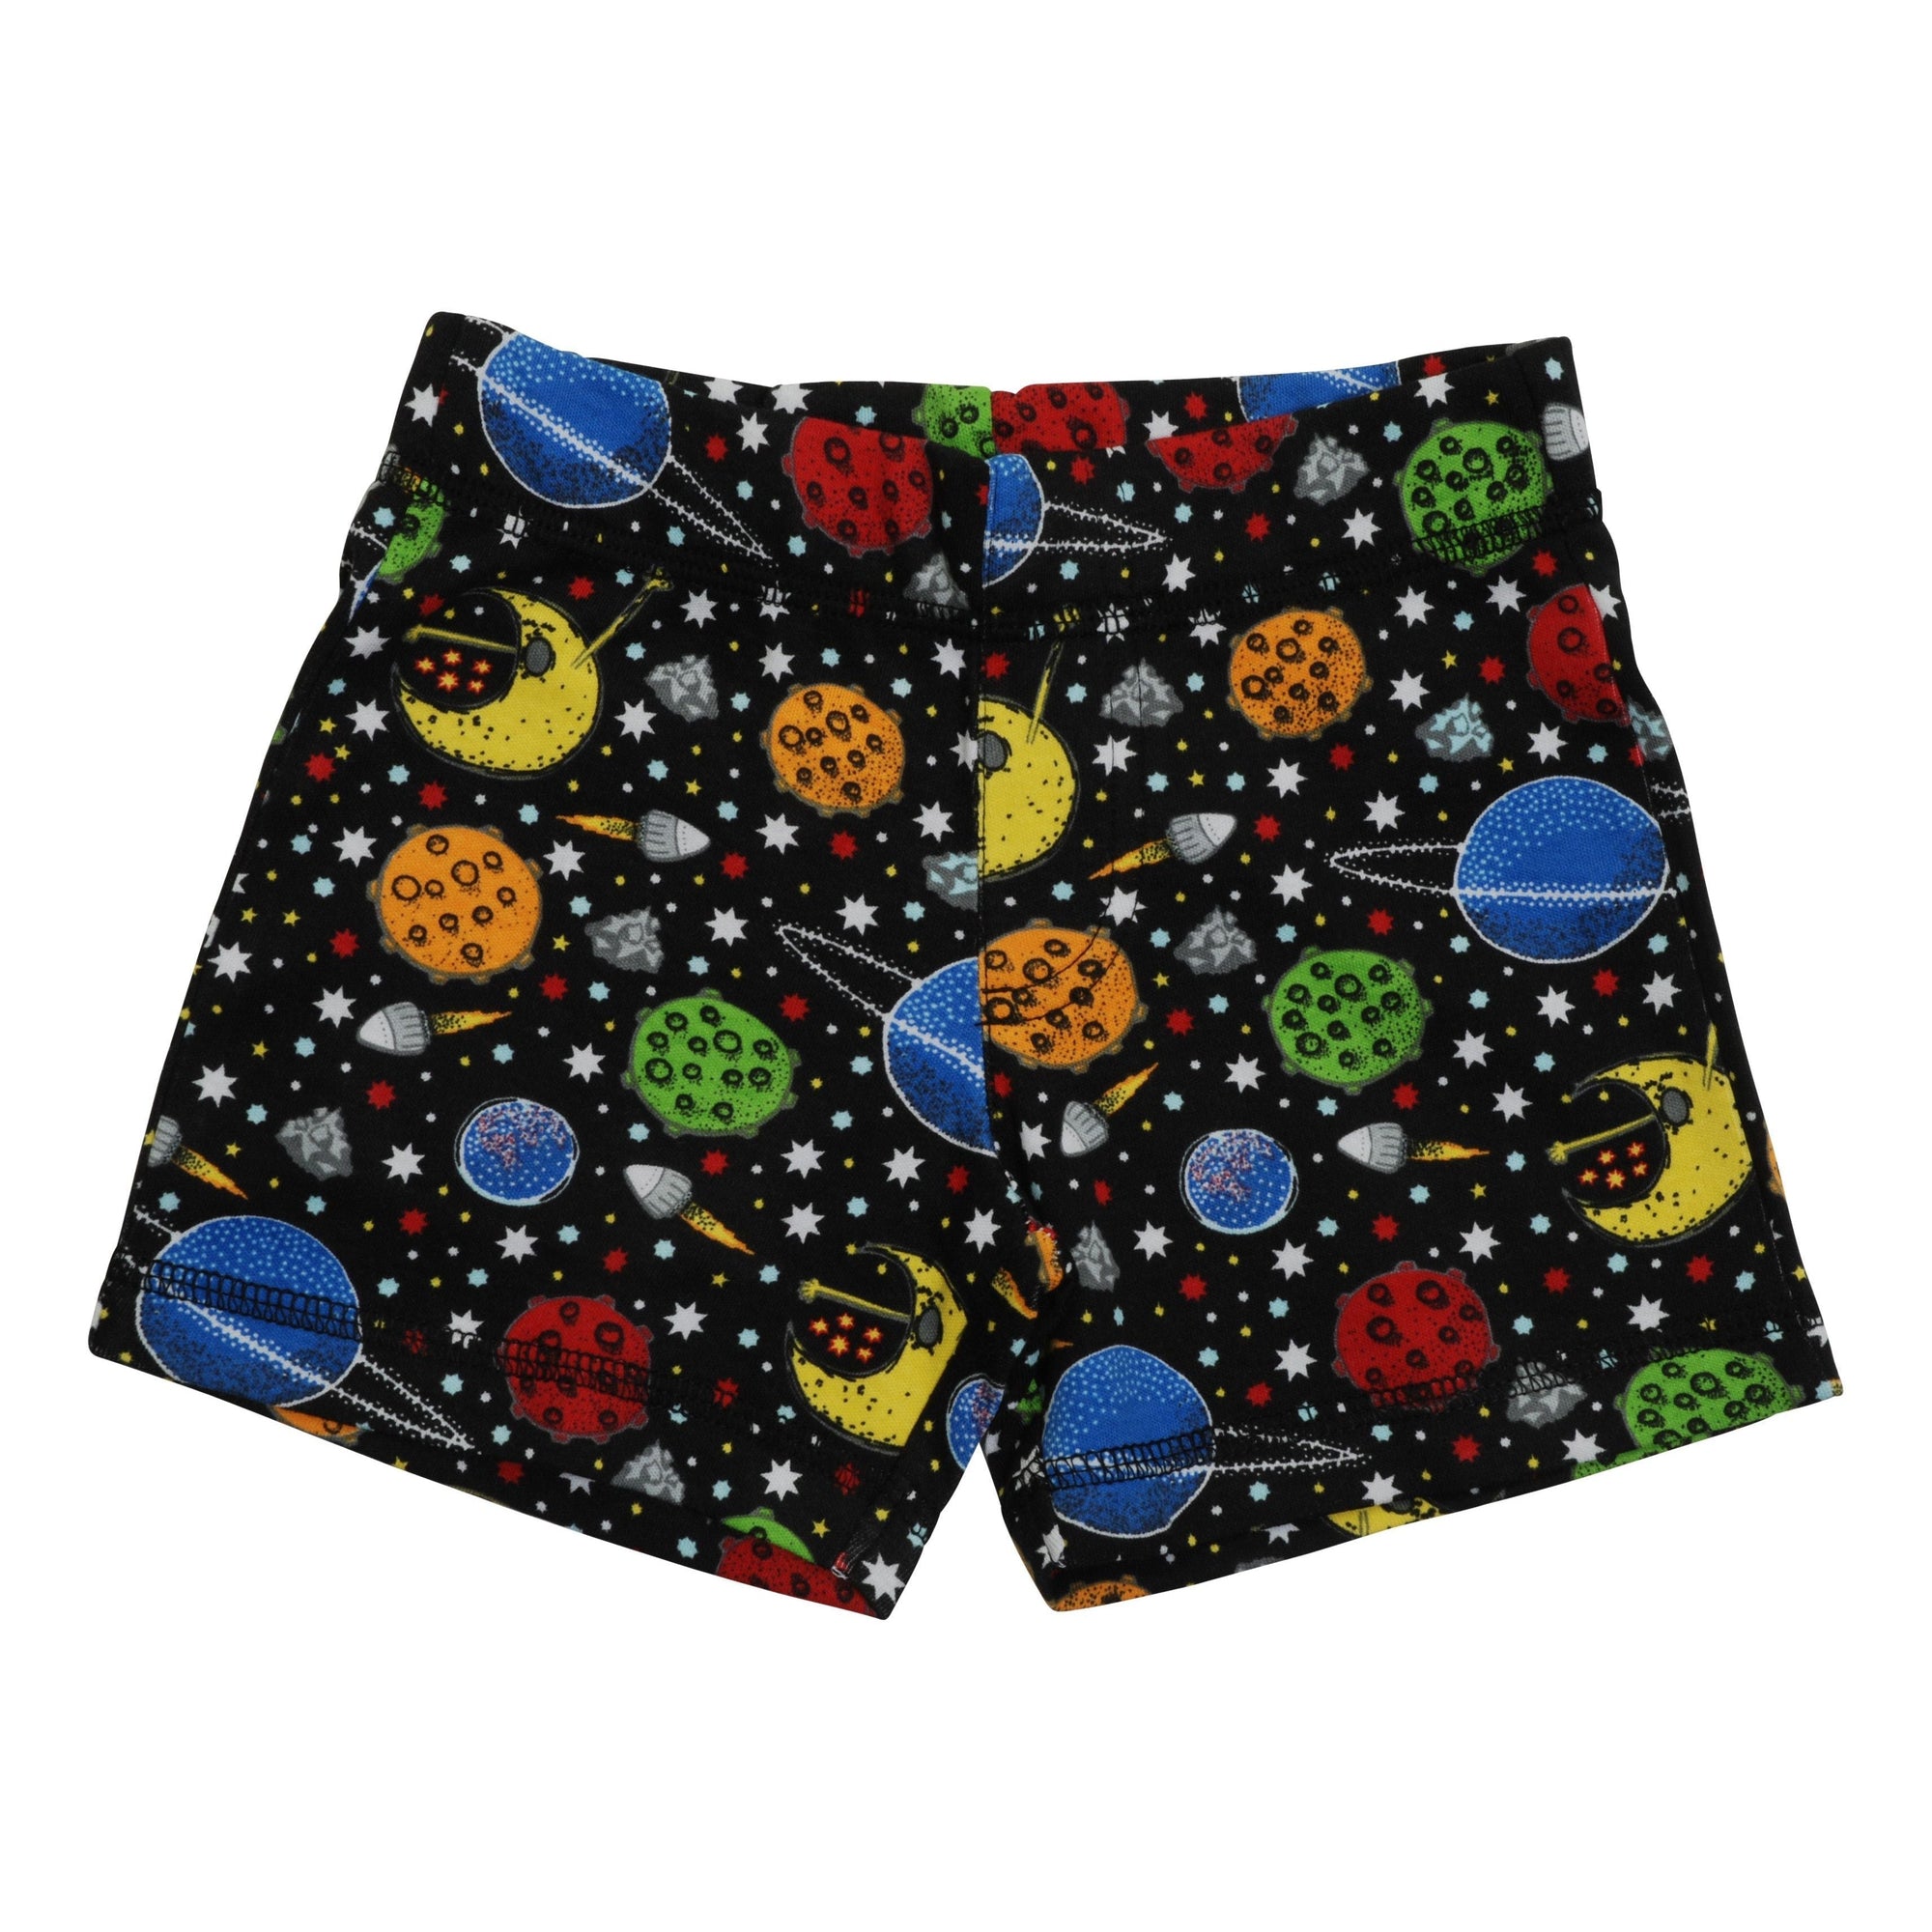 Space Shorts - 2 Left Size 12-14 years-Duns Sweden-Modern Rascals